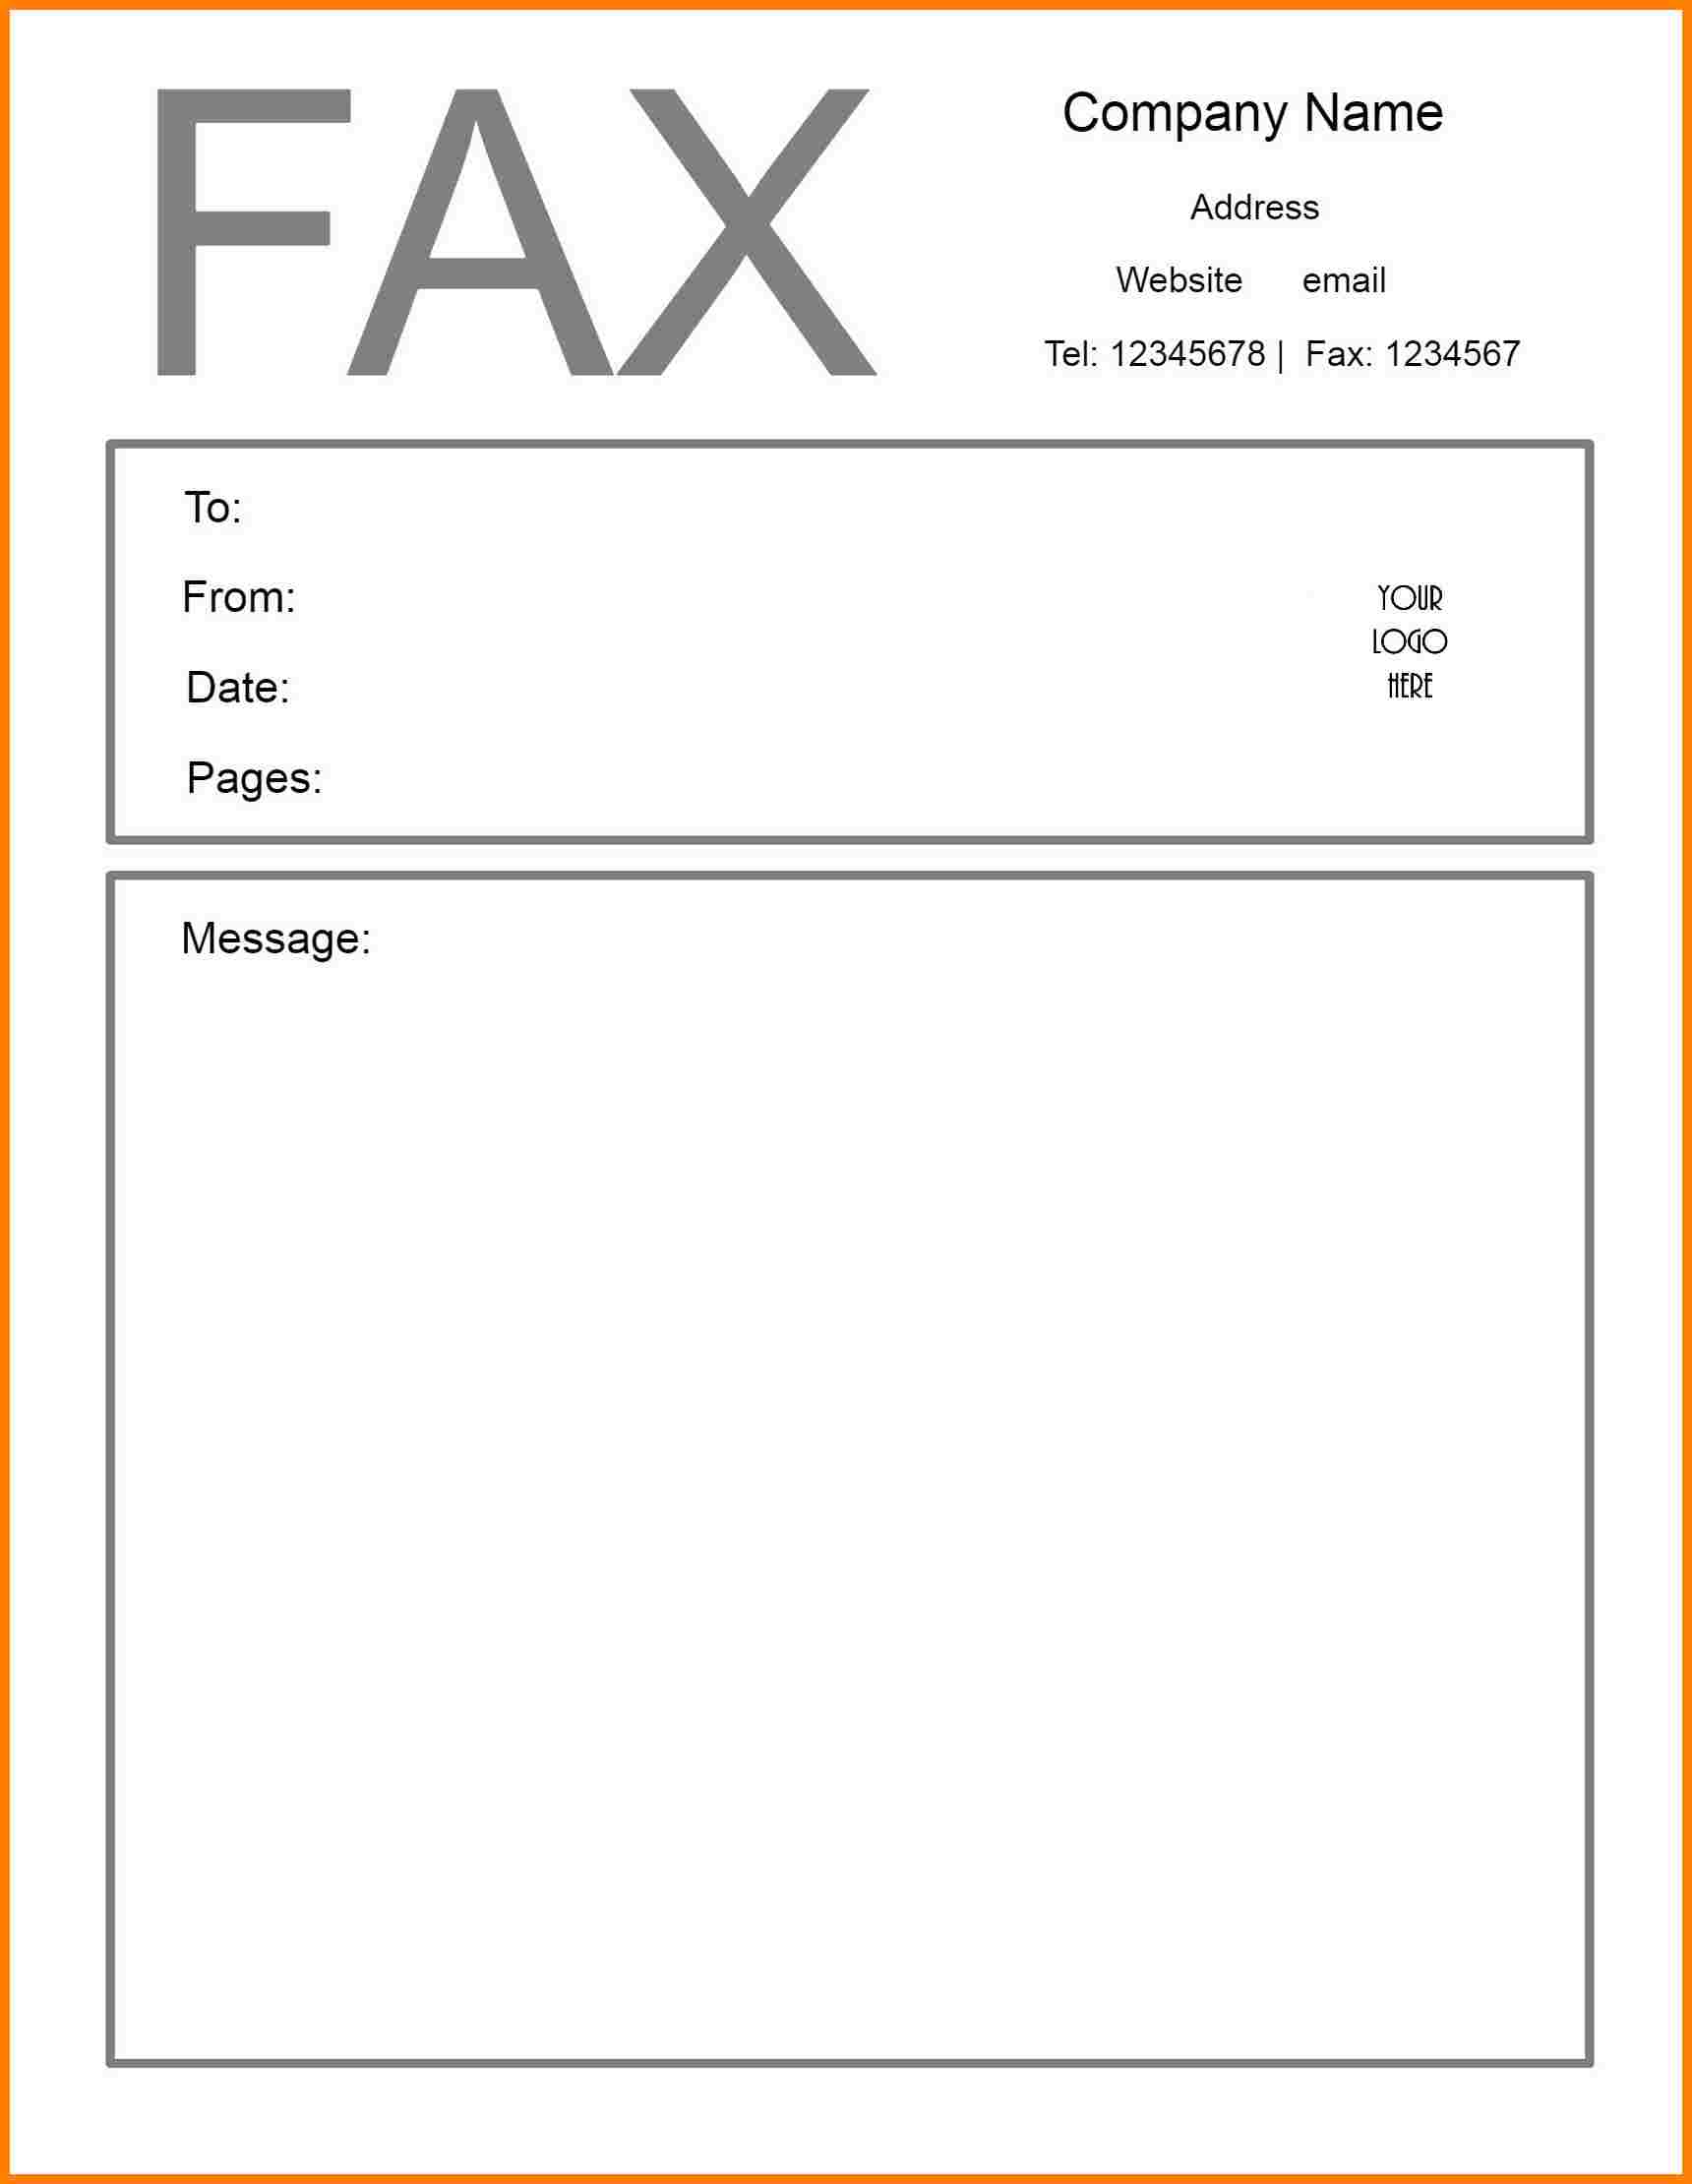 Fax Cover Sheet Examples